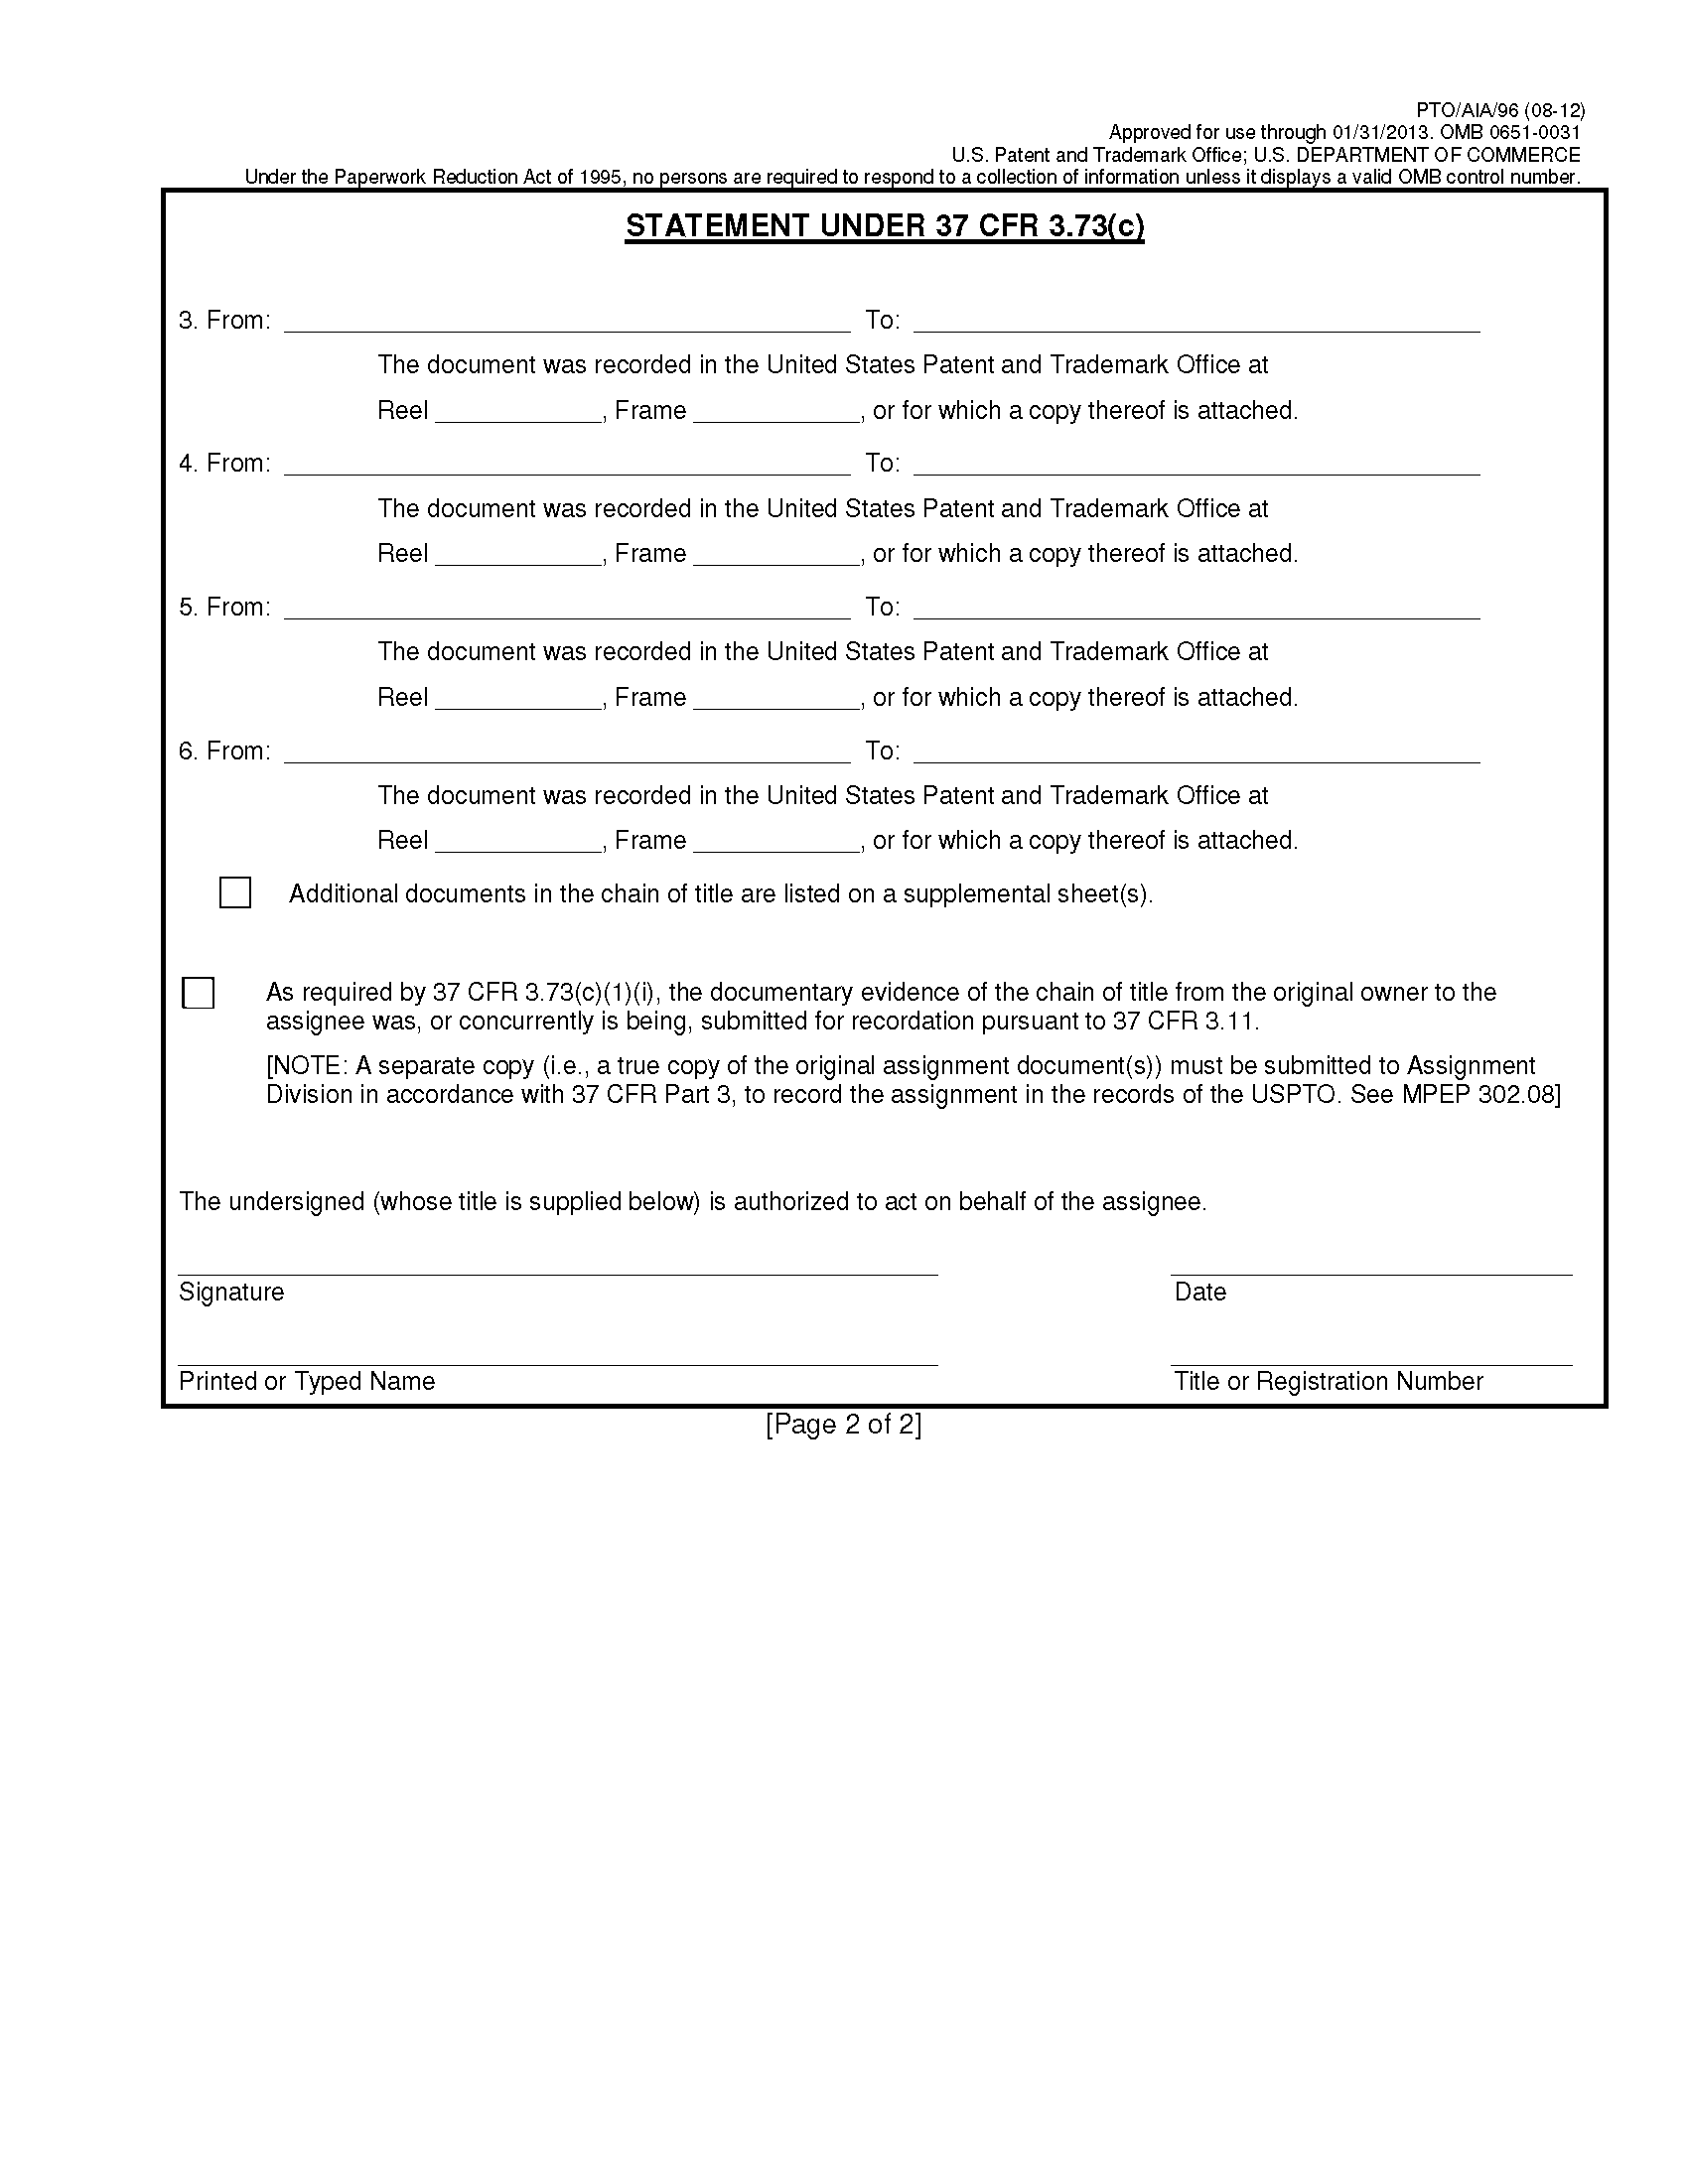 Form PTO/AIA/96. Statement Under 37 CFR 3.73(c), page 2